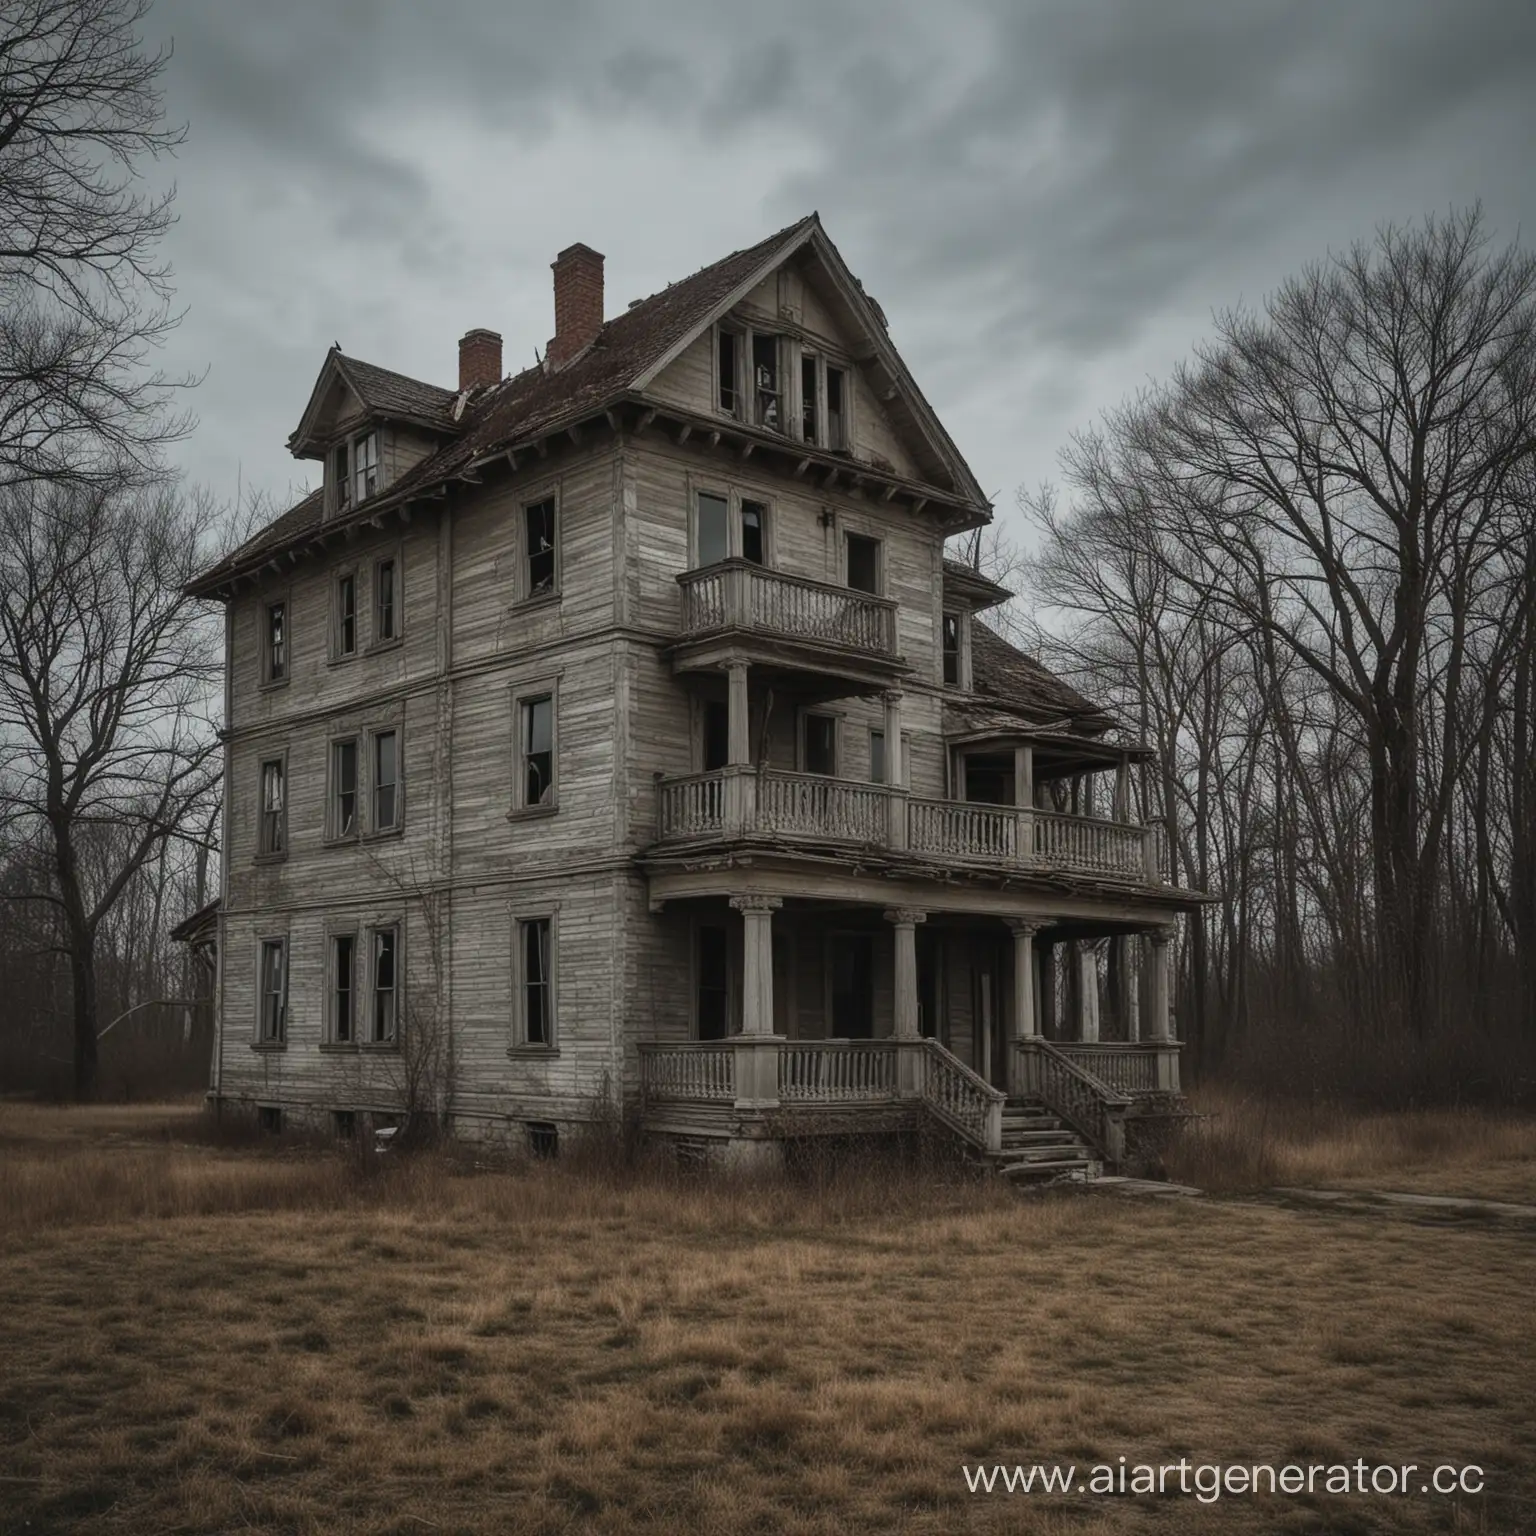 Eerie-Abandoned-House-in-the-Moonlight